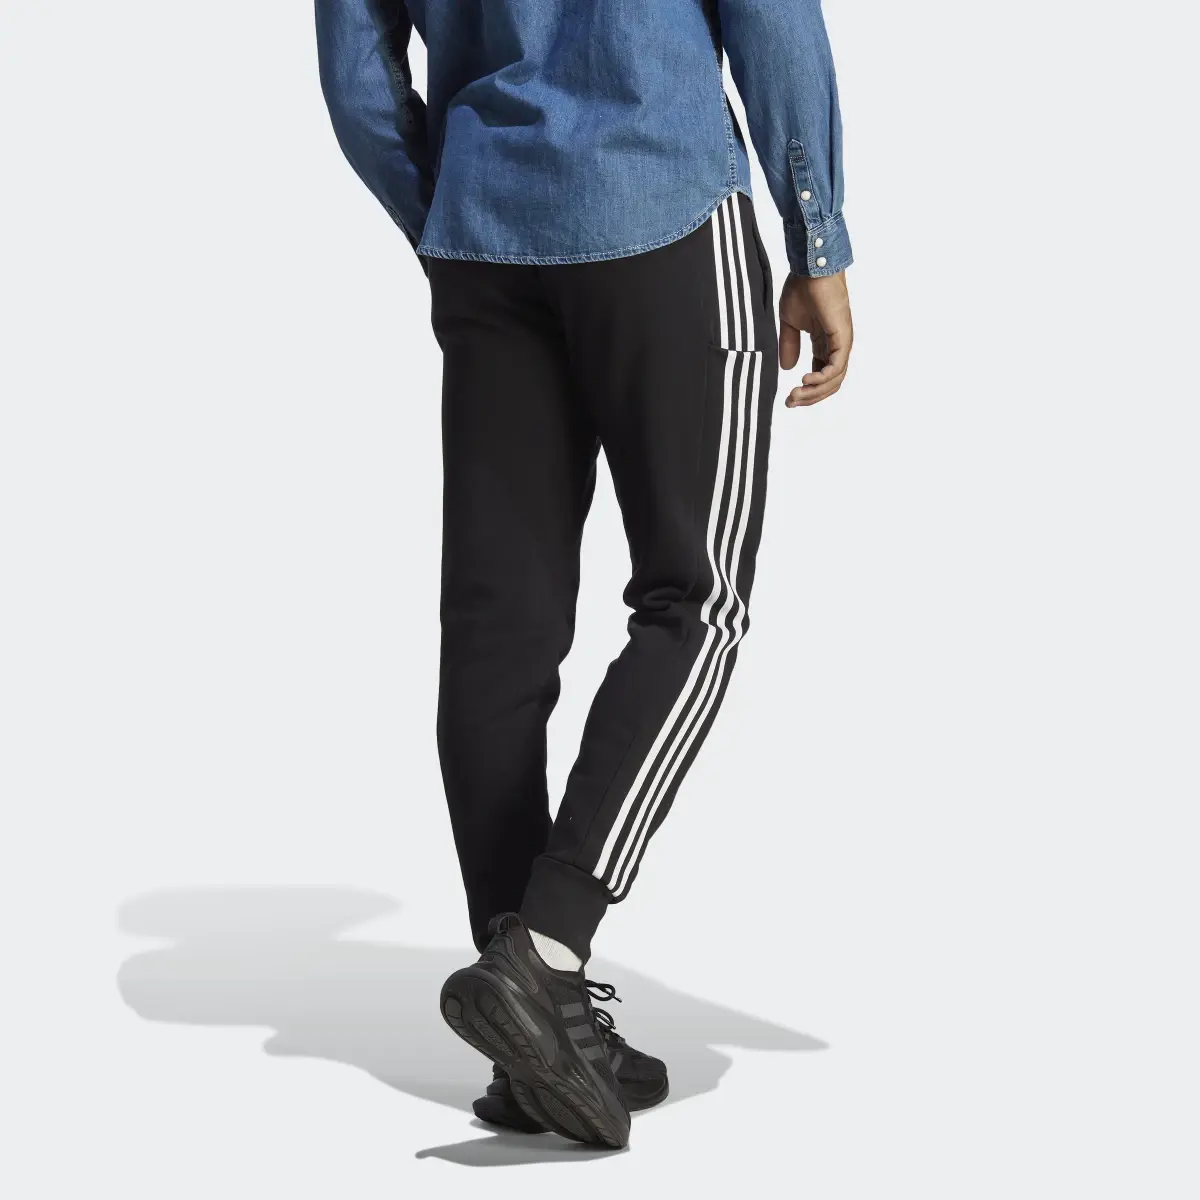 Adidas Essentials French Terry Tapered Cuff 3-Stripes Pants. 3